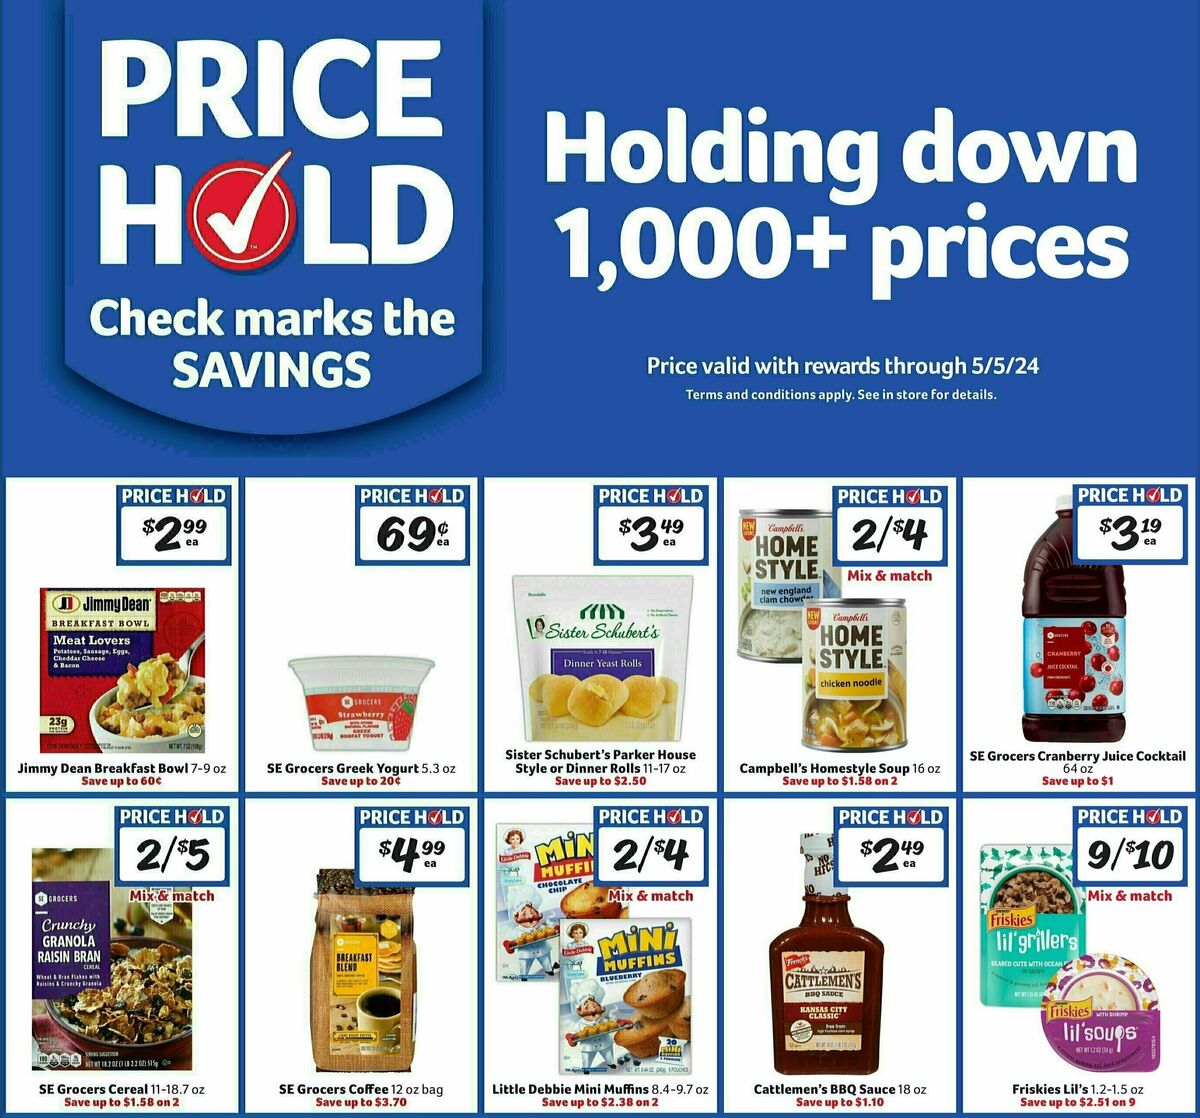 Winn-Dixie Weekly Ad from April 17